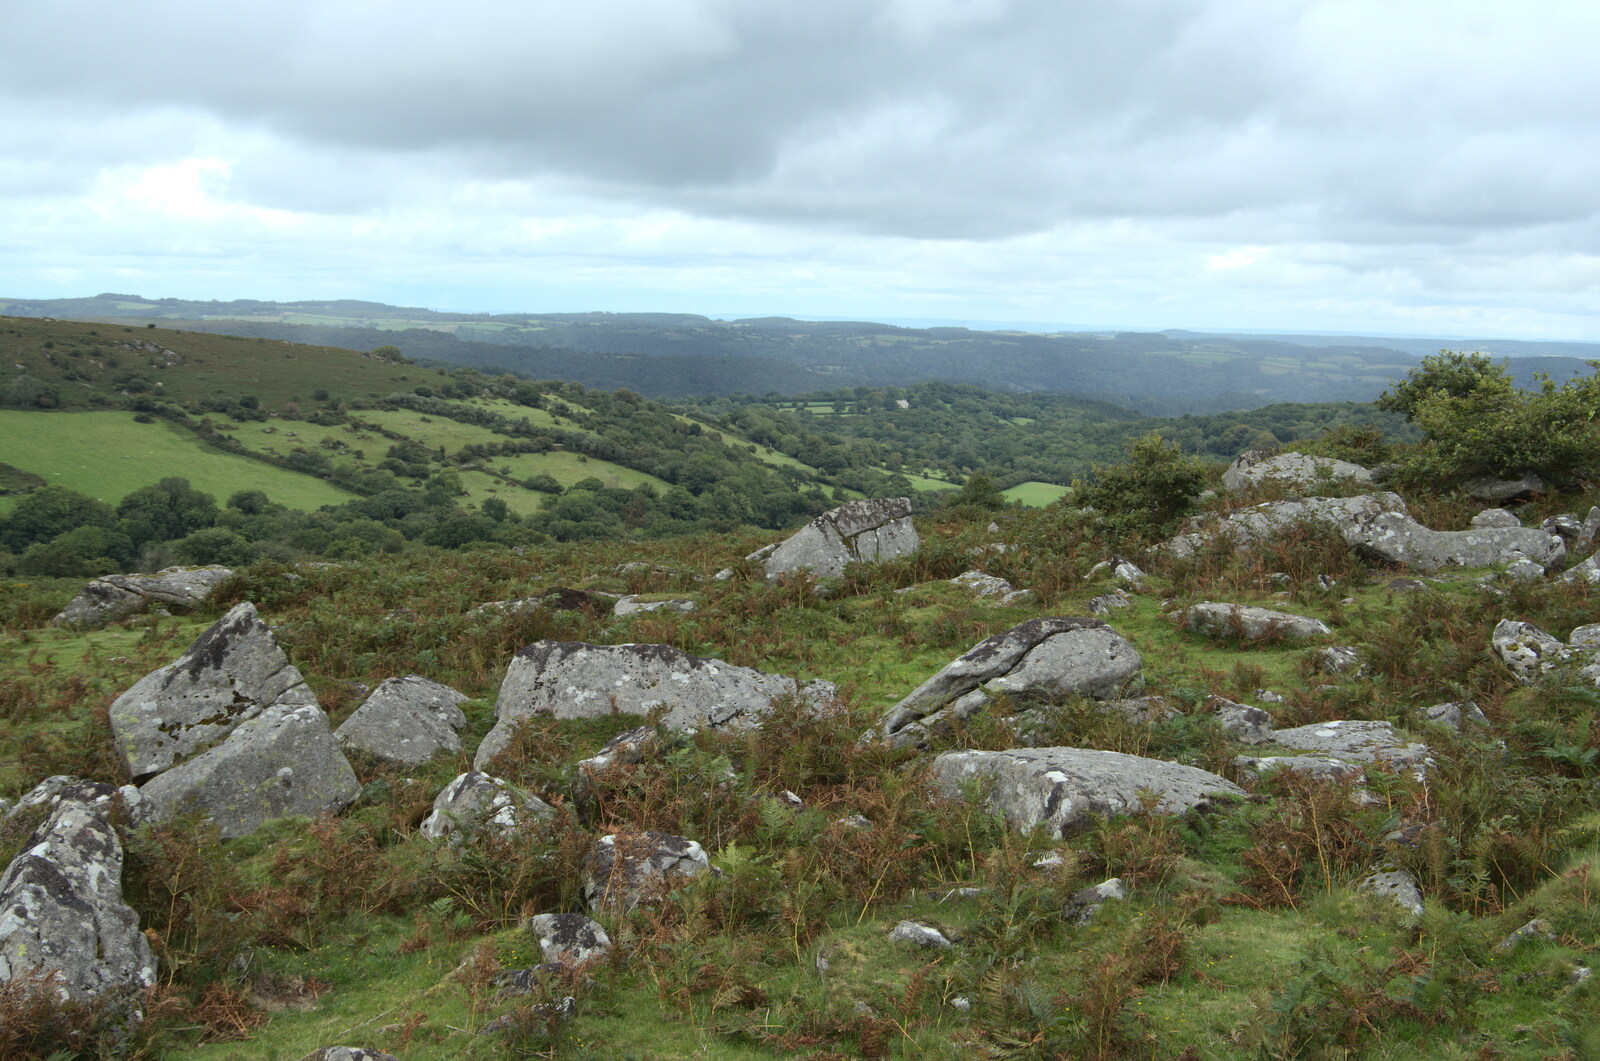 A view over Dartmoor from A Walk up Hound Tor, Dartmoor, Devon - 24th August 2020